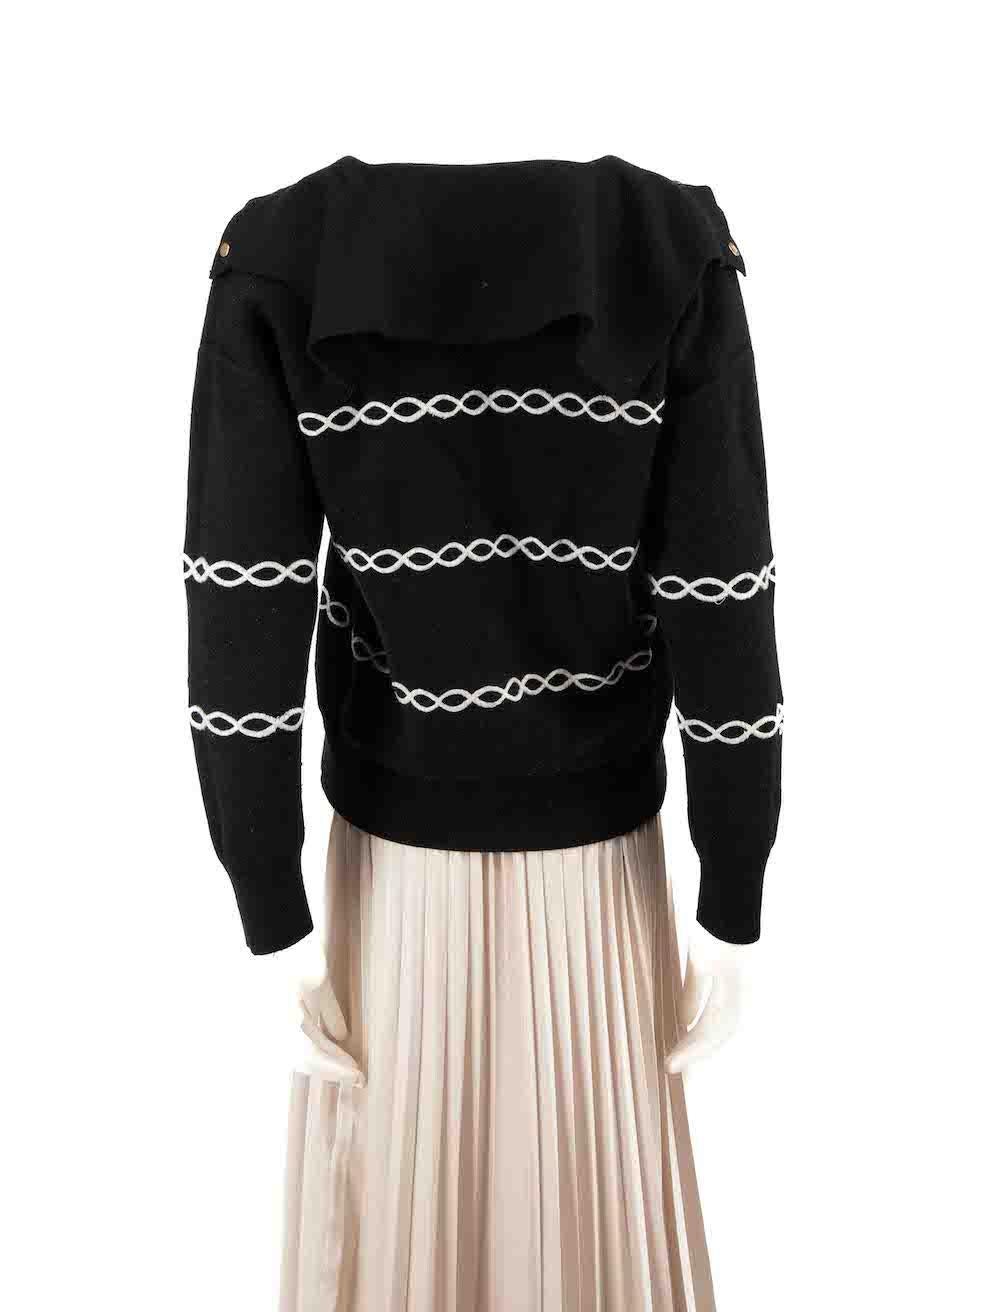 Sandro Black Embroidered Accent Knit Top Size S In Excellent Condition For Sale In London, GB